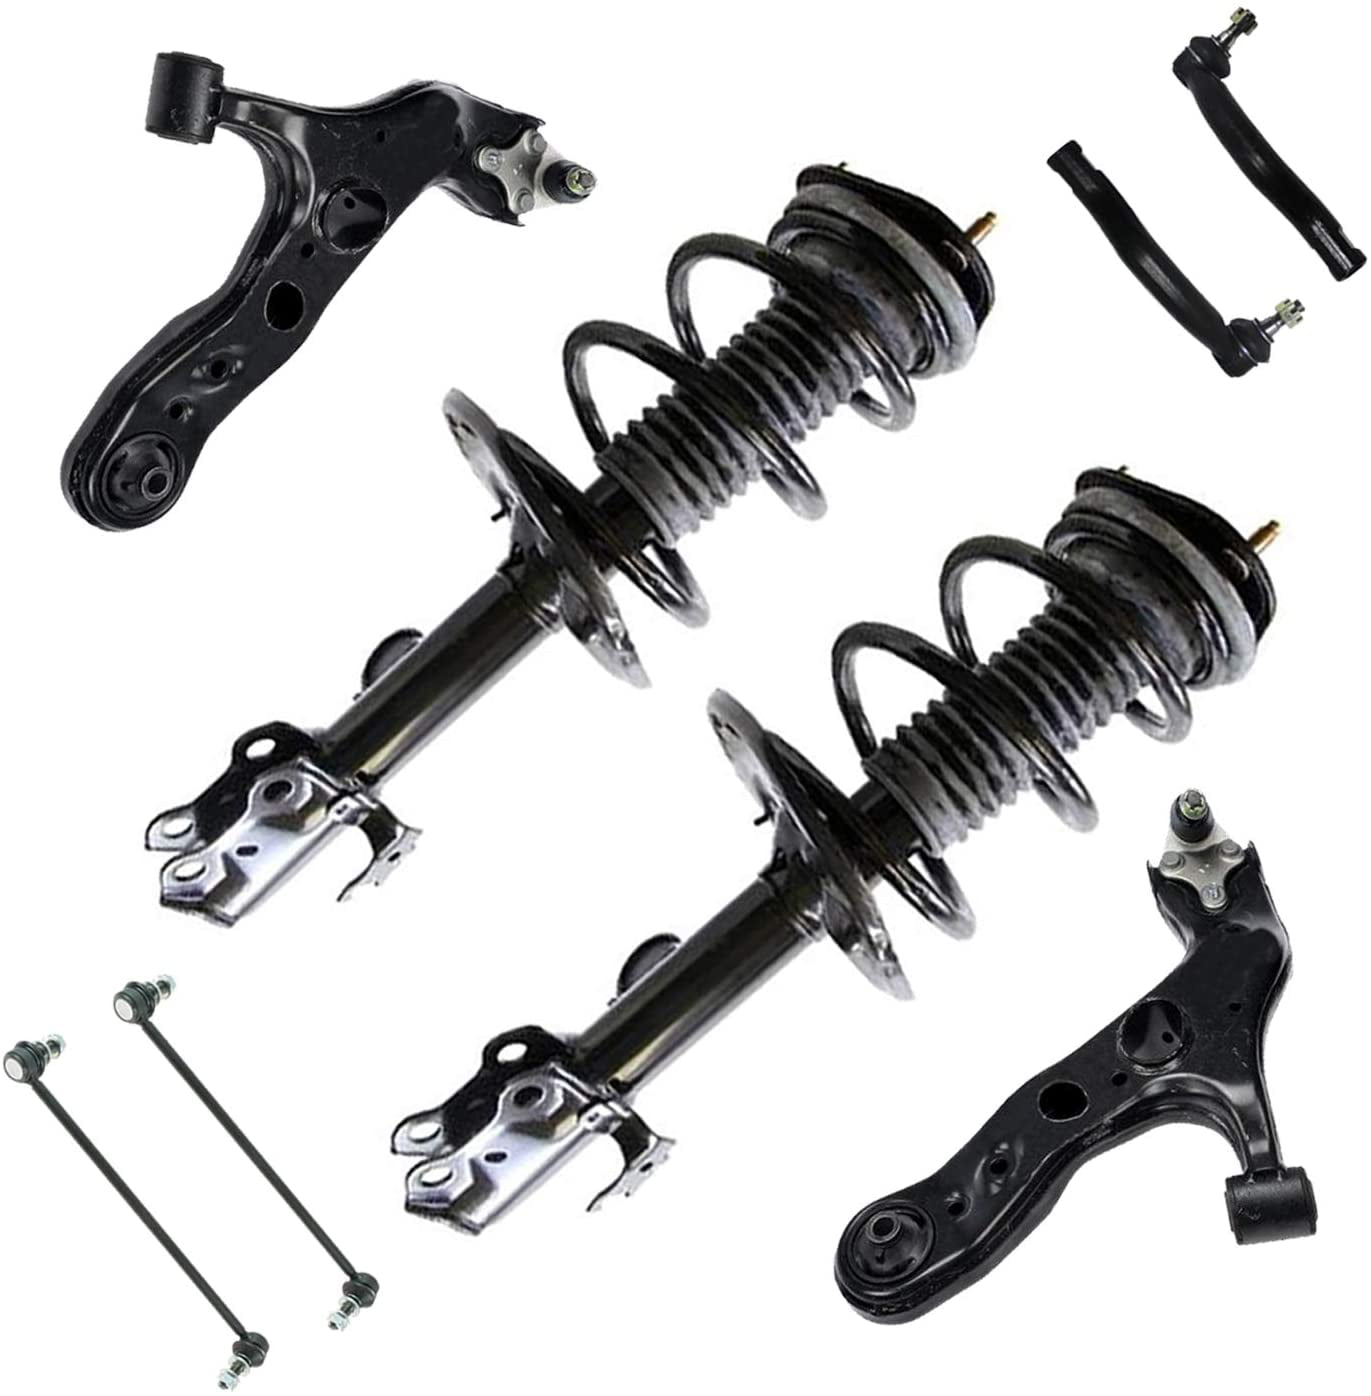 Front Strut w/Coil Springs Rear Shocks Absorbers & Sway Bar End Links for 2006-2012 Toyota RAV4 3.5L Models Only Detroit Axle 